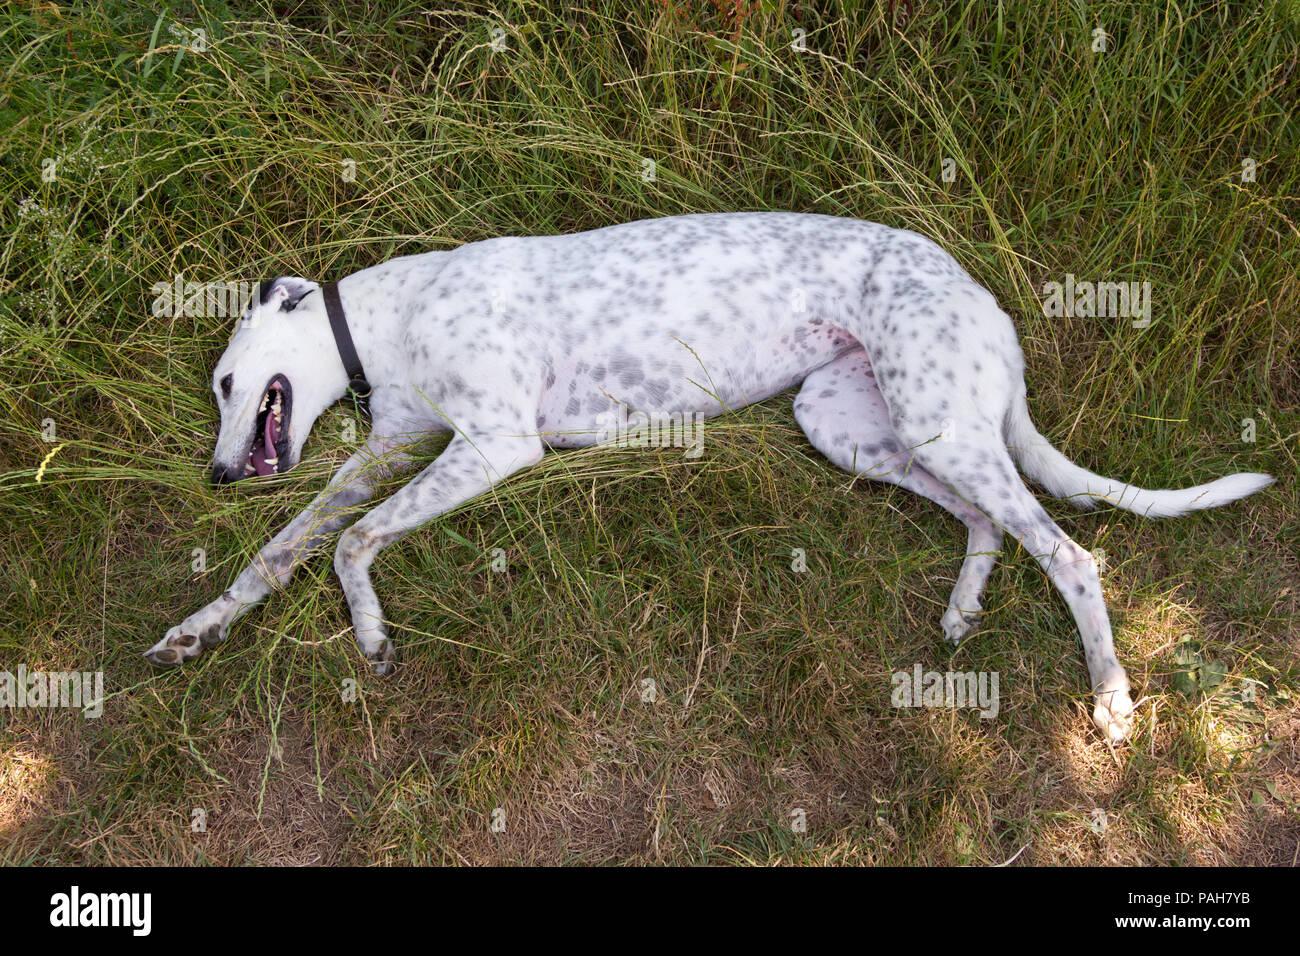 Greyhound Dog lying down on grass, trying to cool down in hot weather. Stock Photo